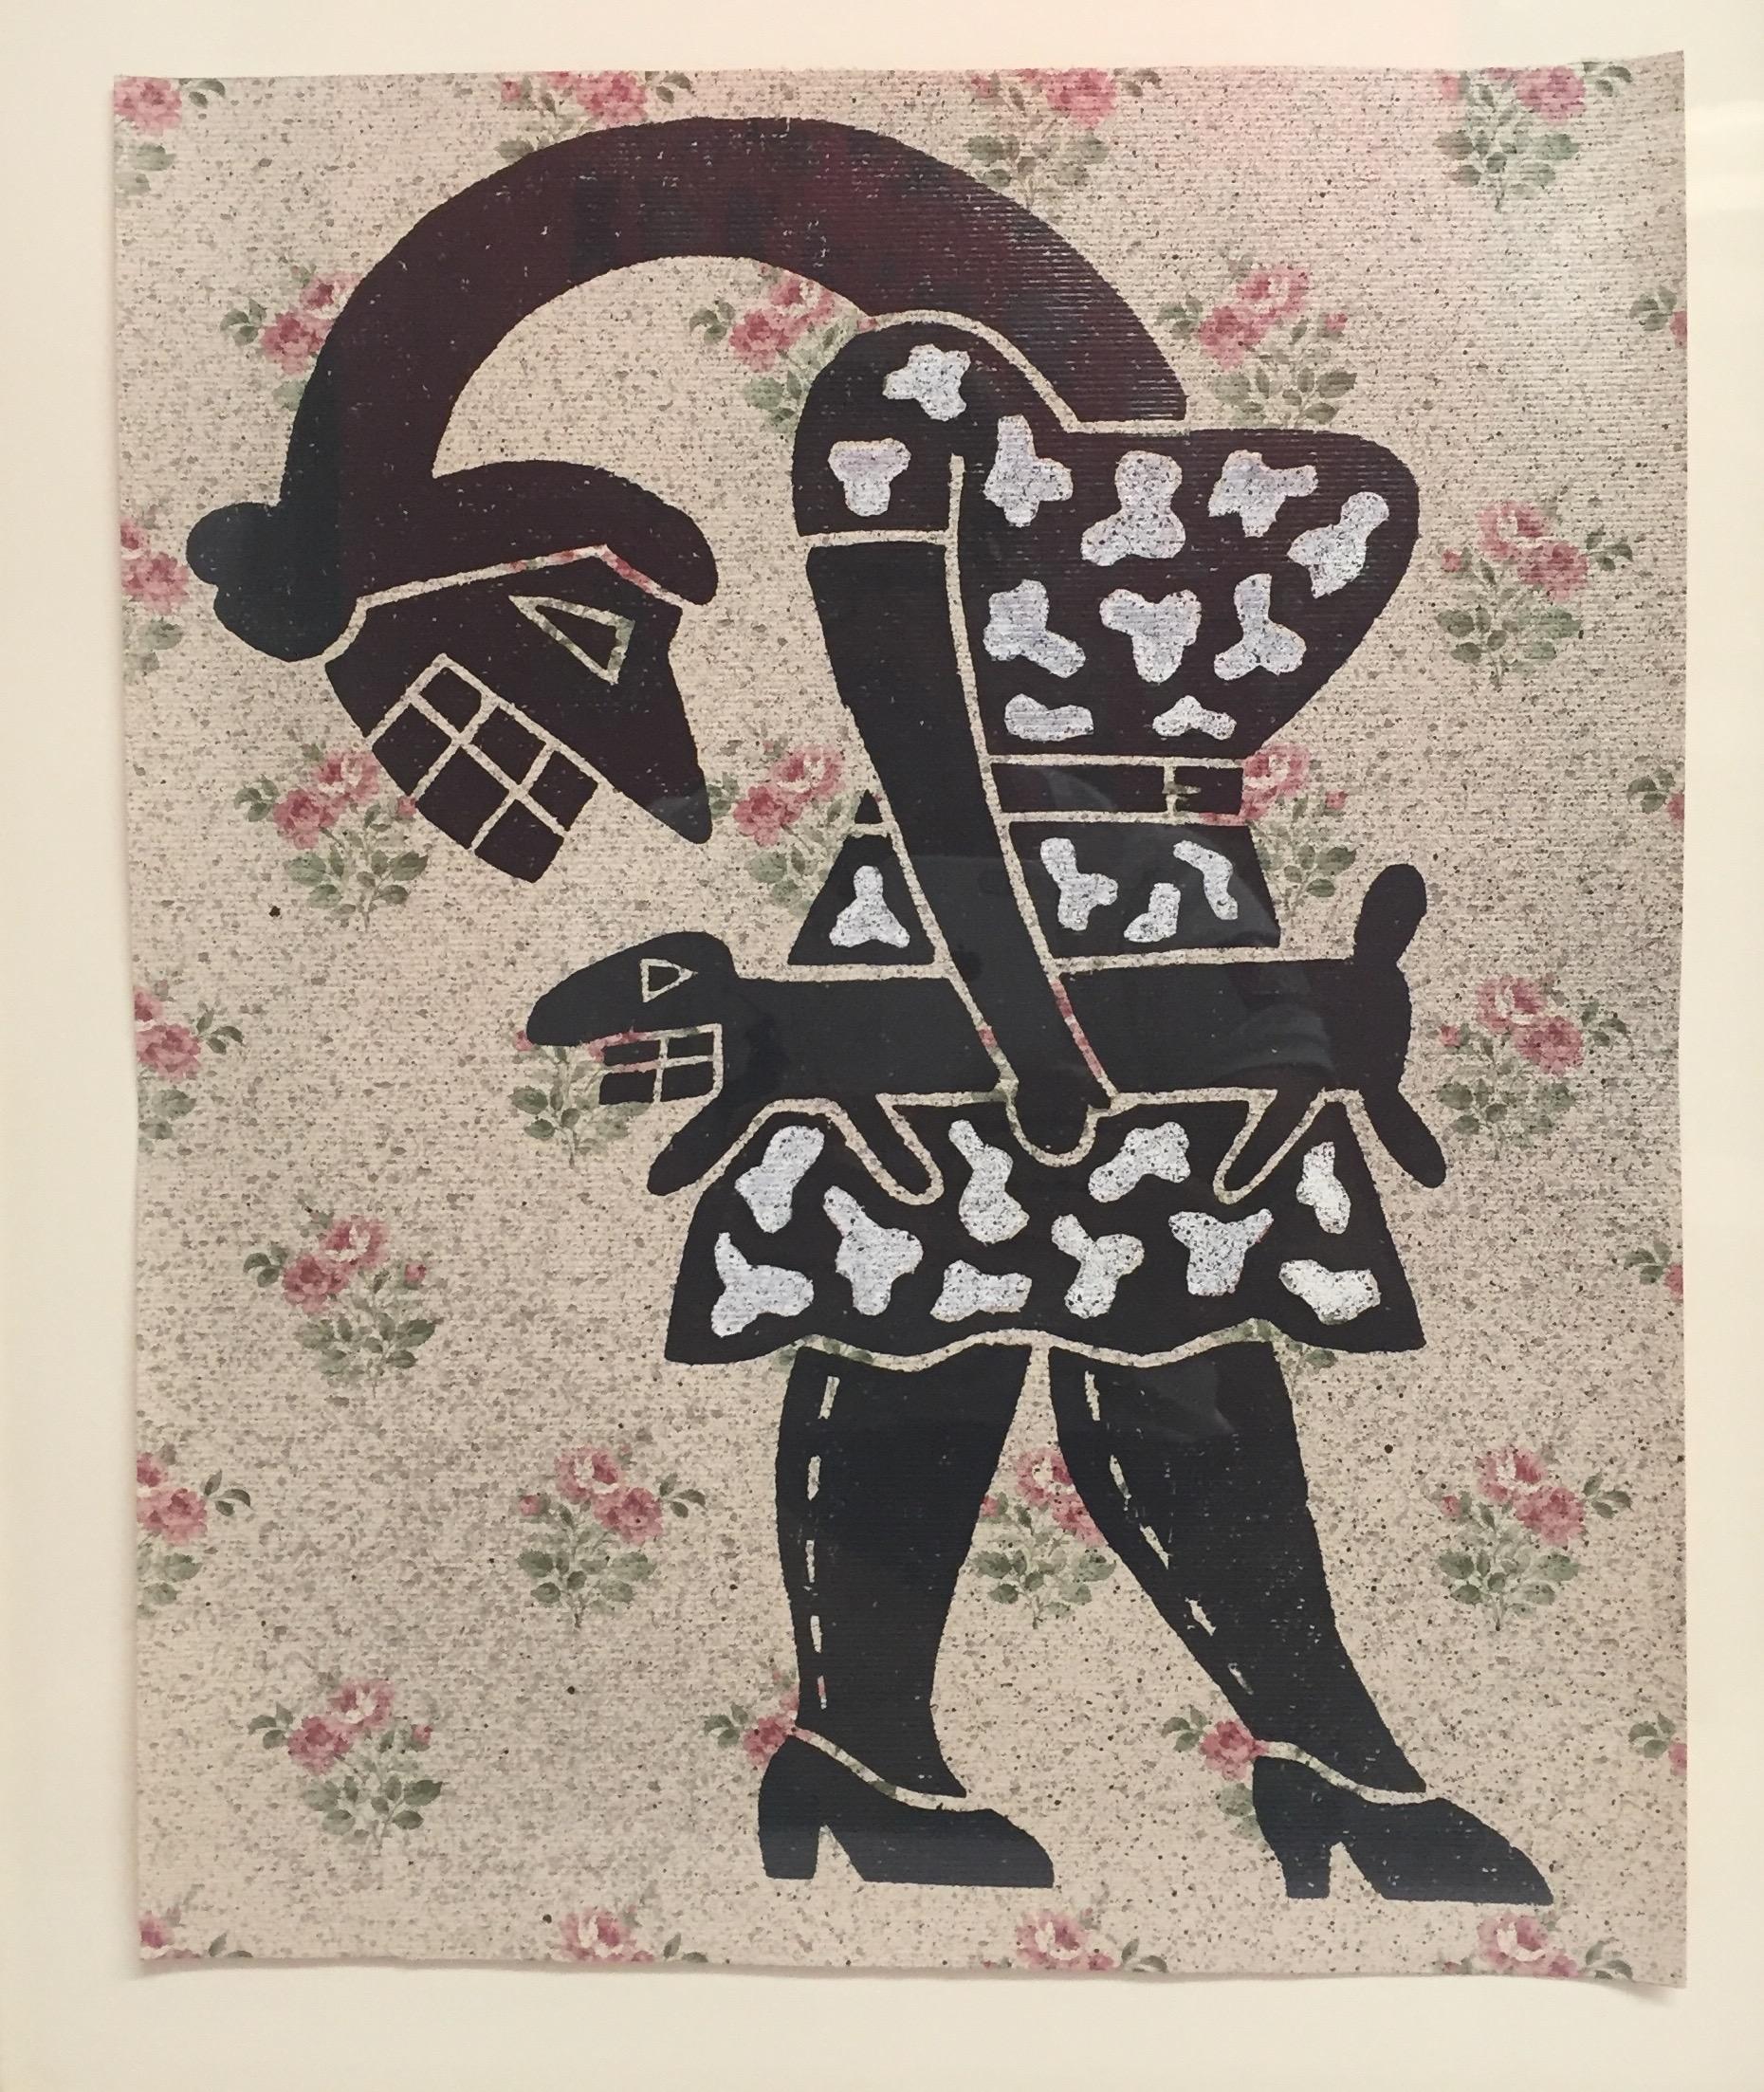 Keith Haring-esque abstract woodblock on vintage French wallpaper, where the subject is a buxom woman holding a handbag in the shape of a weiner dog. Custom frame, print itself is 17 x 14.
Unsigned
From the illustrious collection of Tim Hunt &